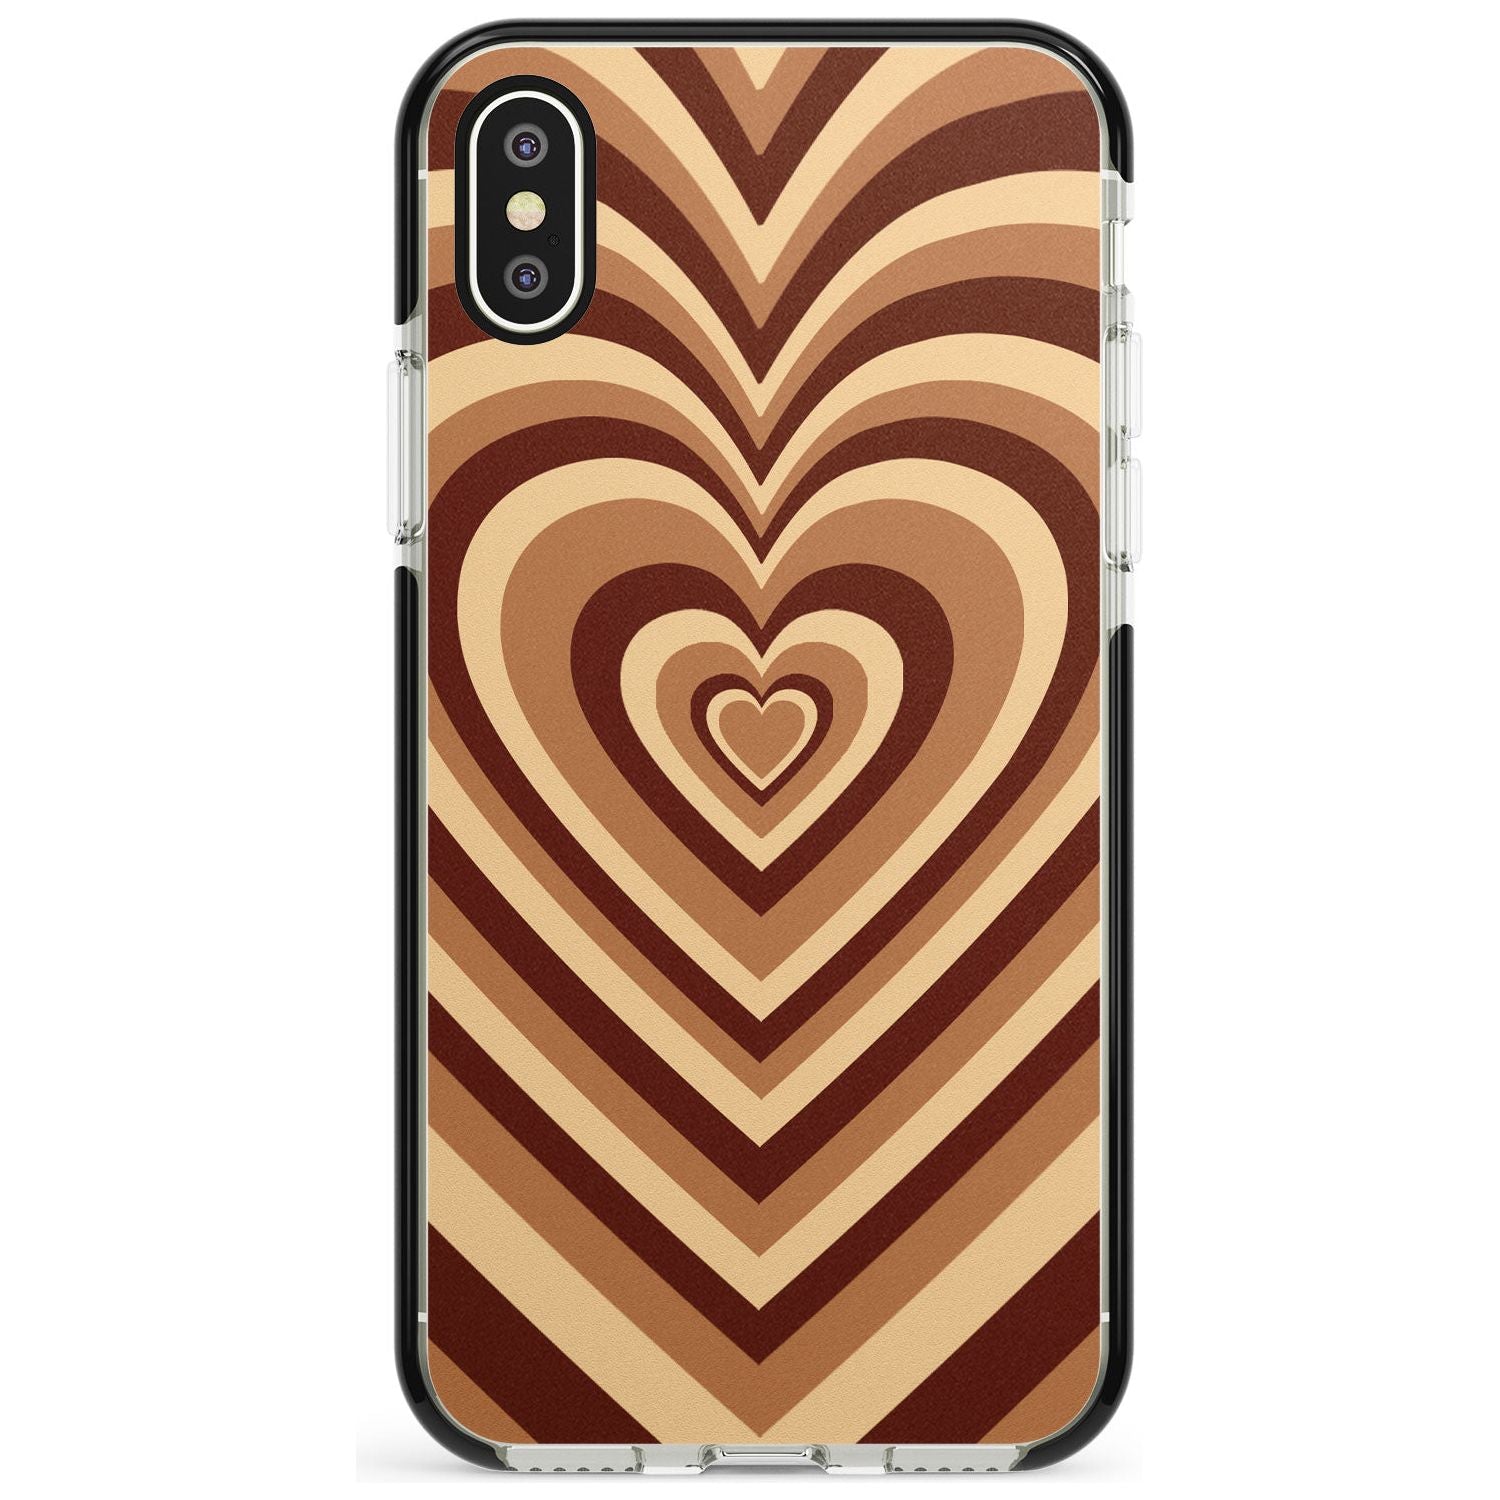 Latte Heart Illusion Black Impact Phone Case for iPhone X XS Max XR